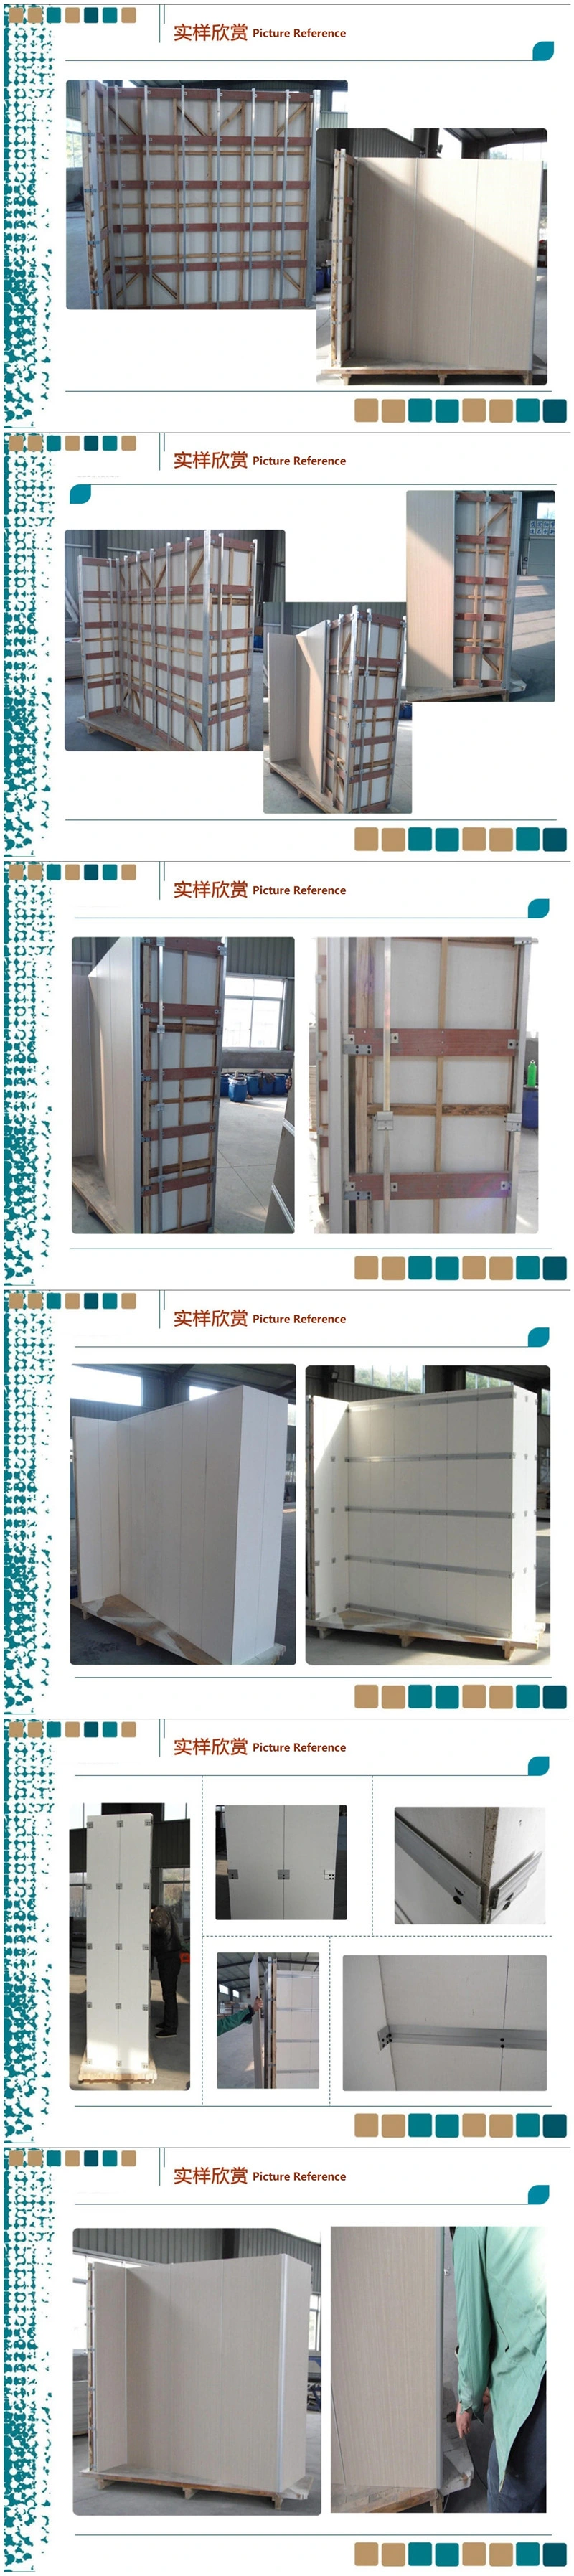 Boiler Insulation Material Fireproof High Density Fire Resistant Ceramic Soluble Board